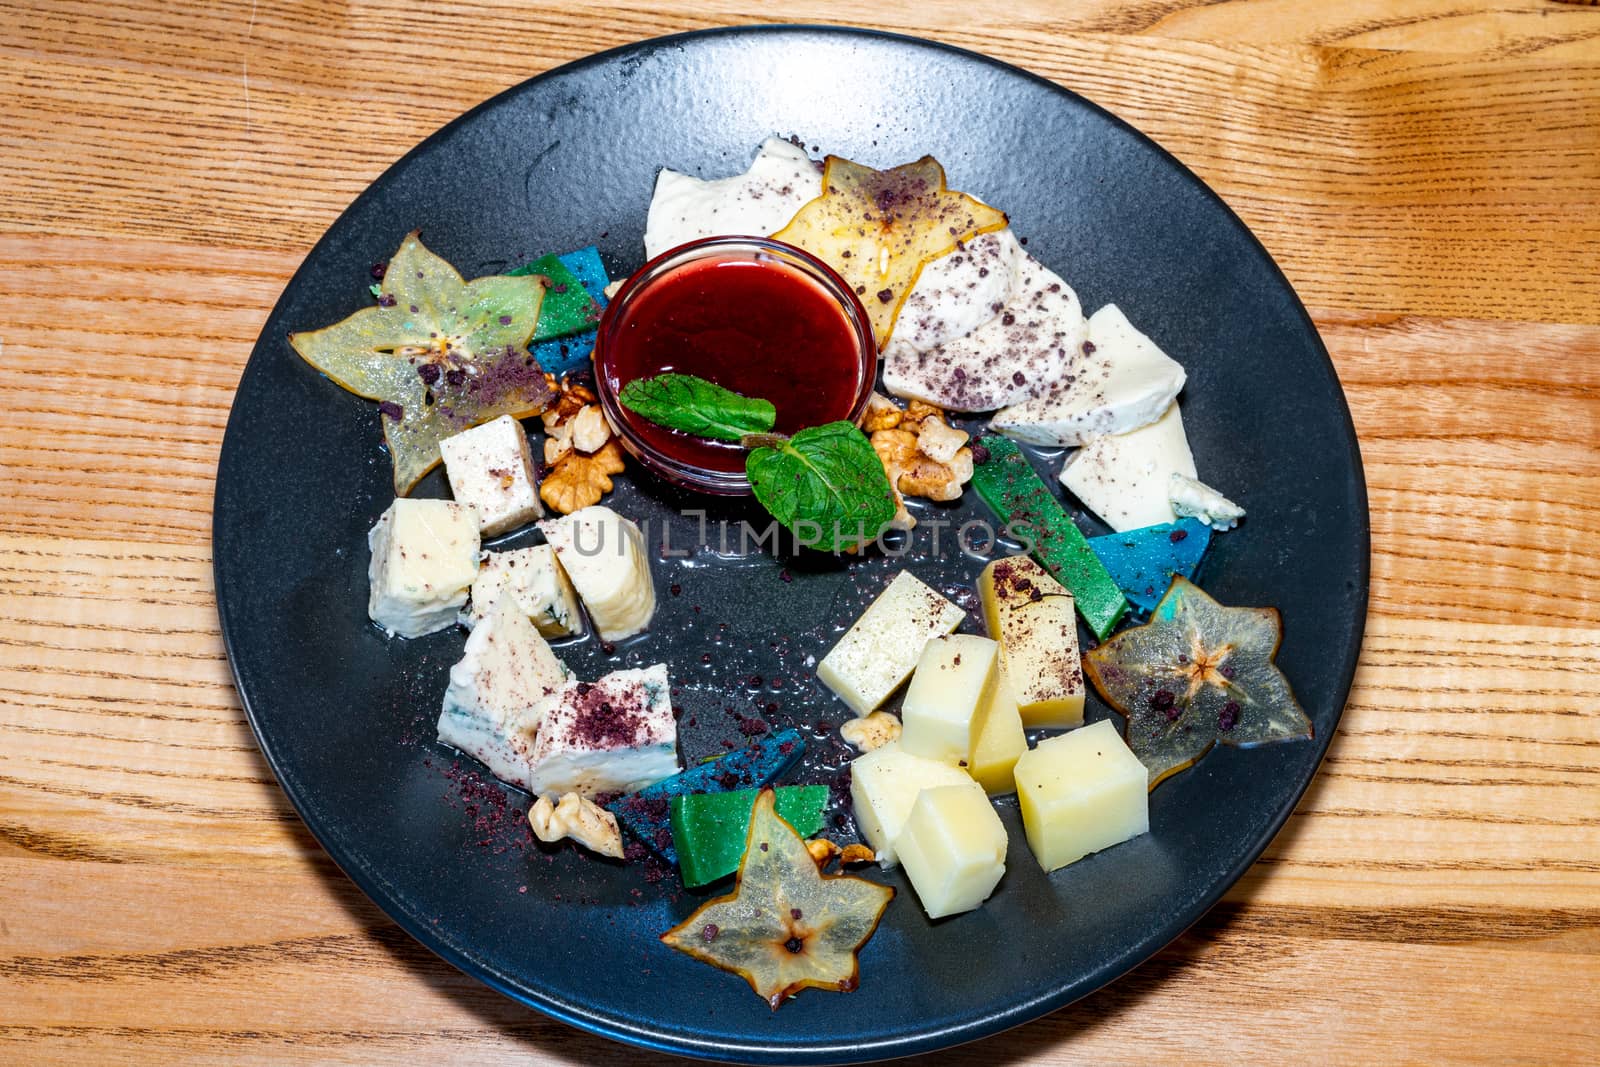 Farm cheeses. Three types of cheese and sauce on a black plate